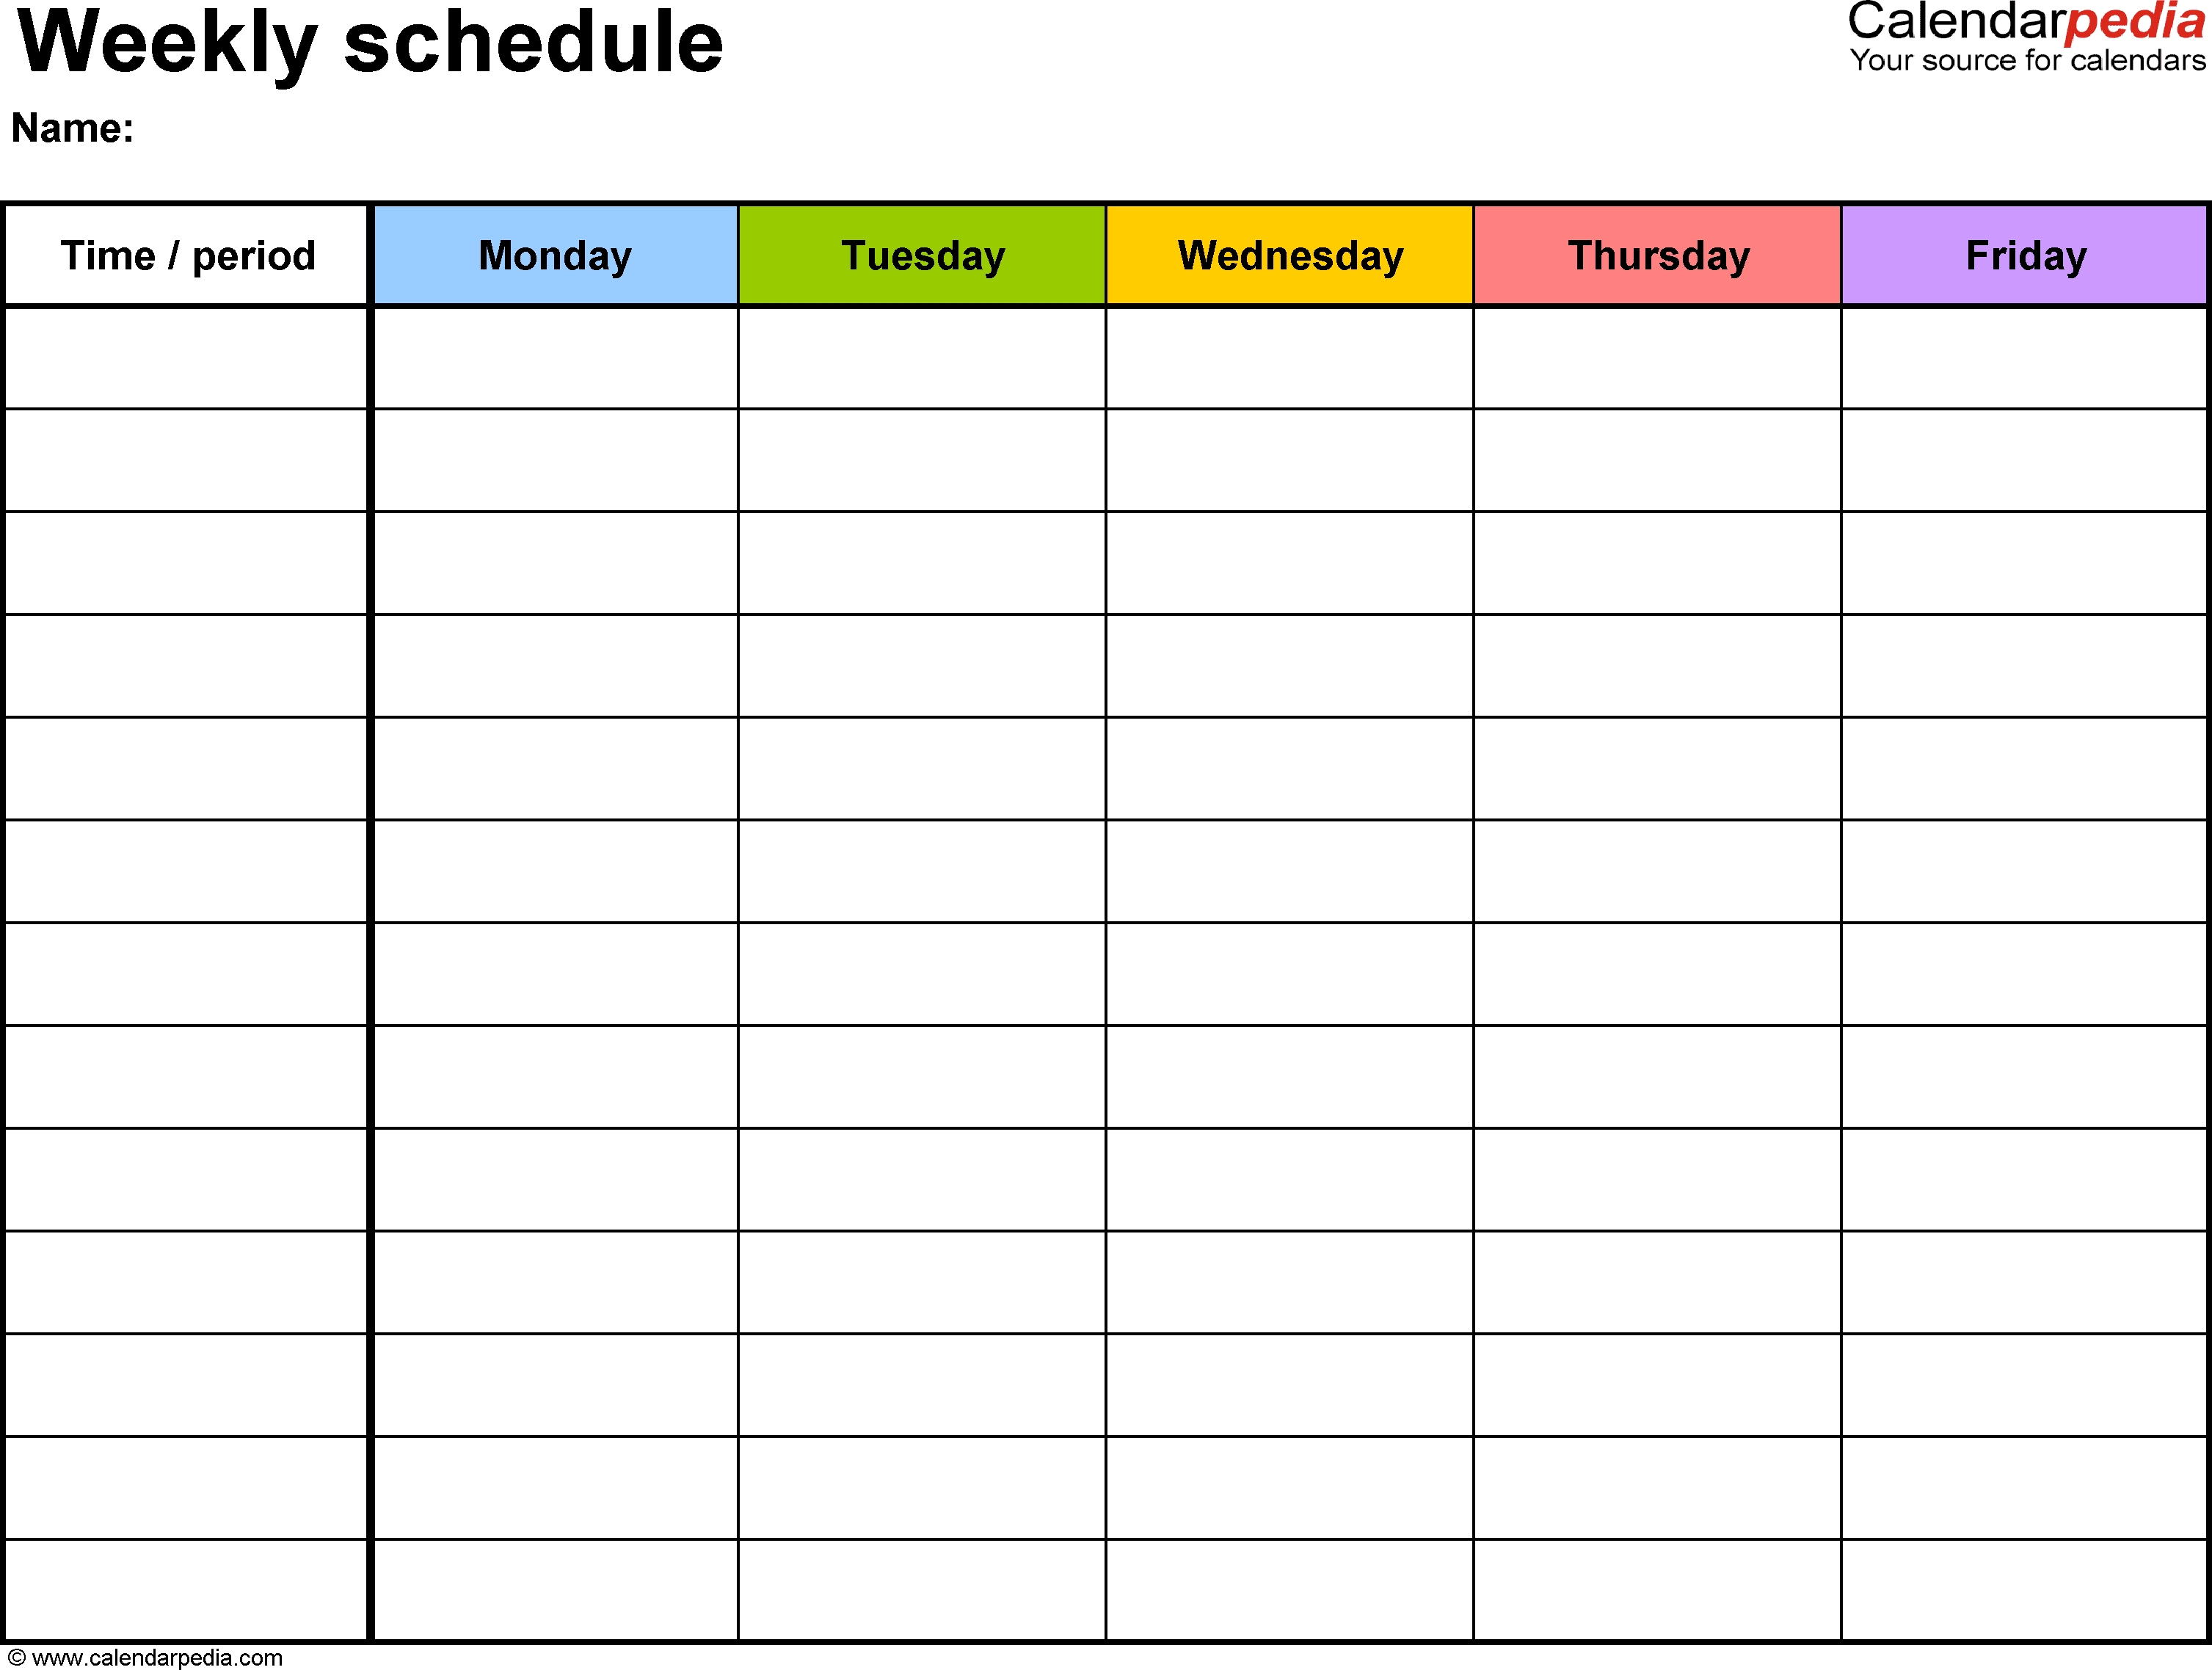 Free Weekly Schedule Templates For Pdf - 18 Templates Calendar Template One Week